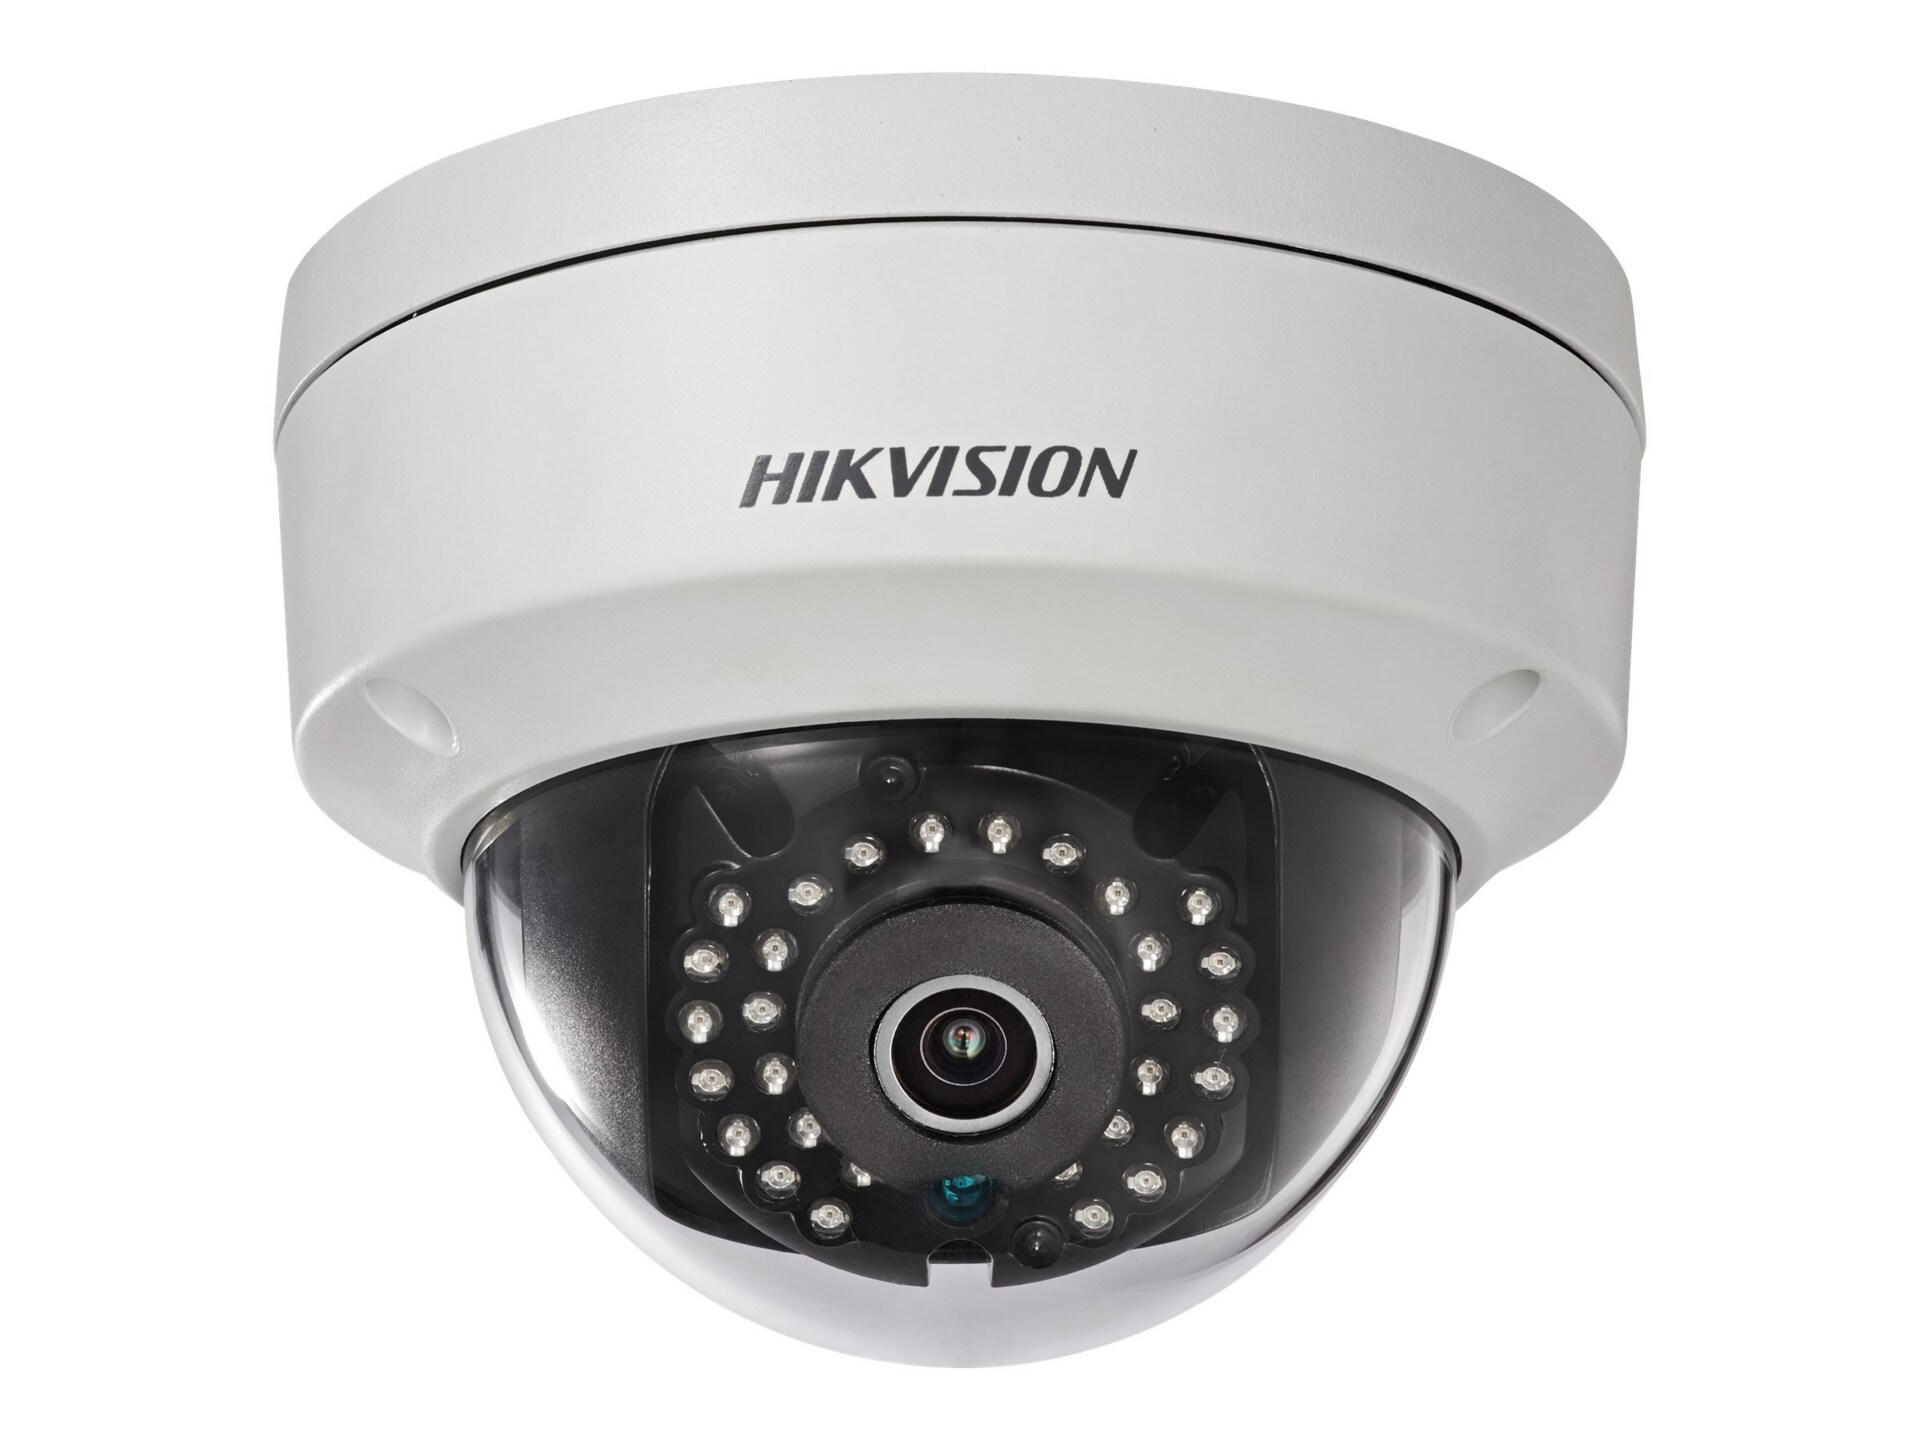 Hikvision DS-2CD2142FWD-IS - network surveillance camera